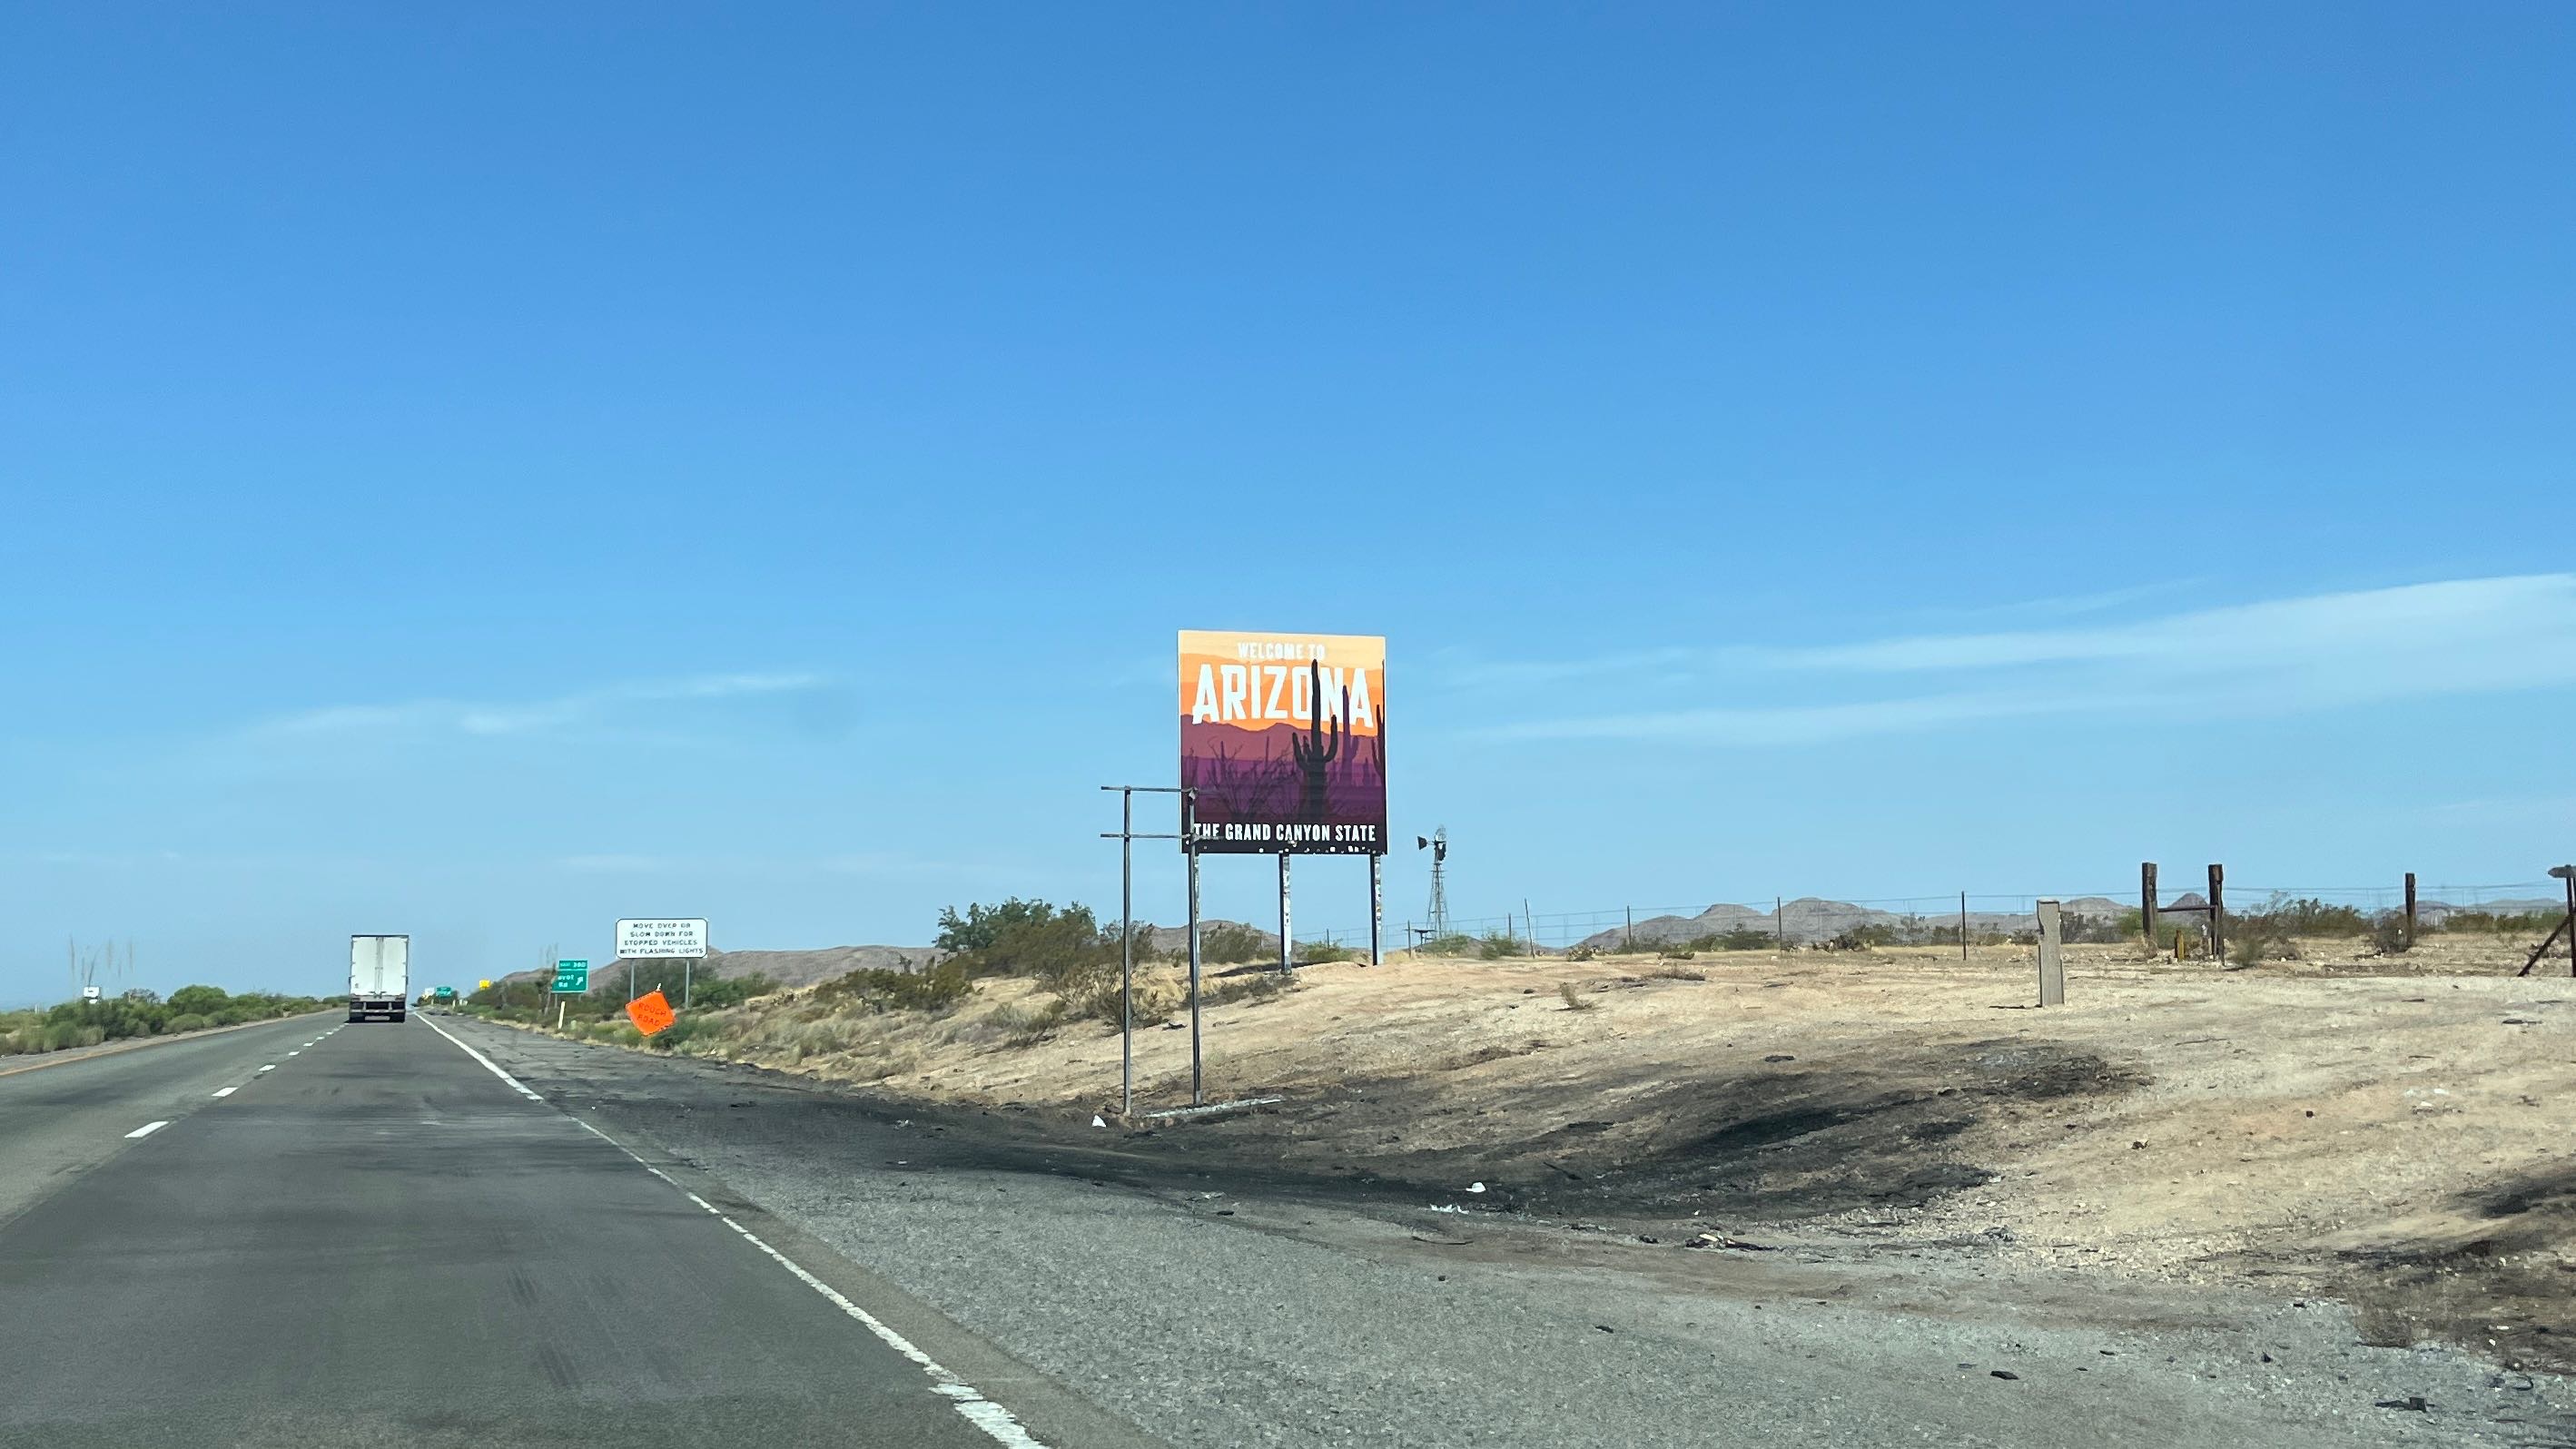 Photo of the Welcome to Arizona sign on the highway